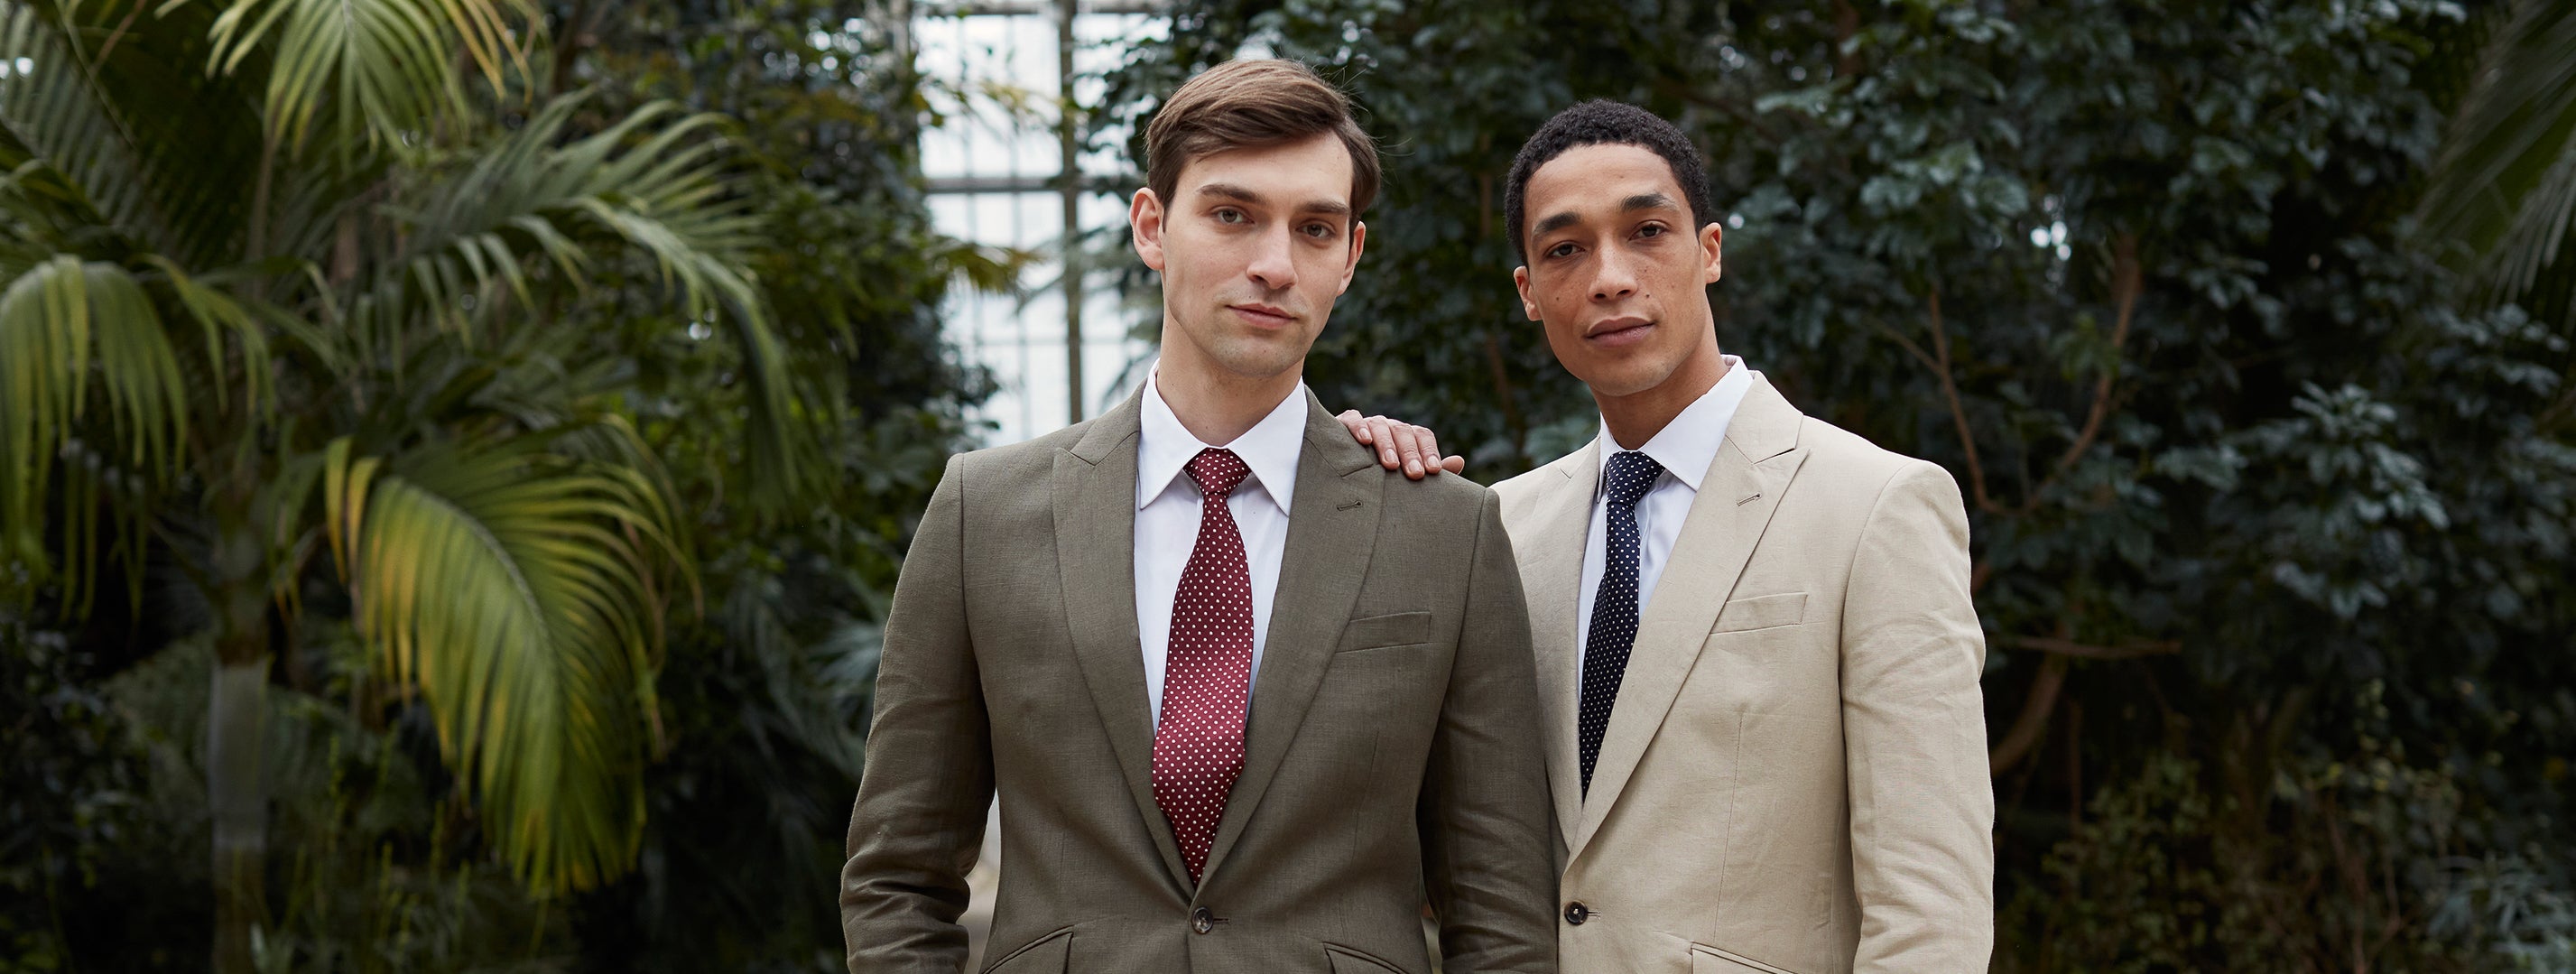 Linen: the perfect suit fabric for Summer